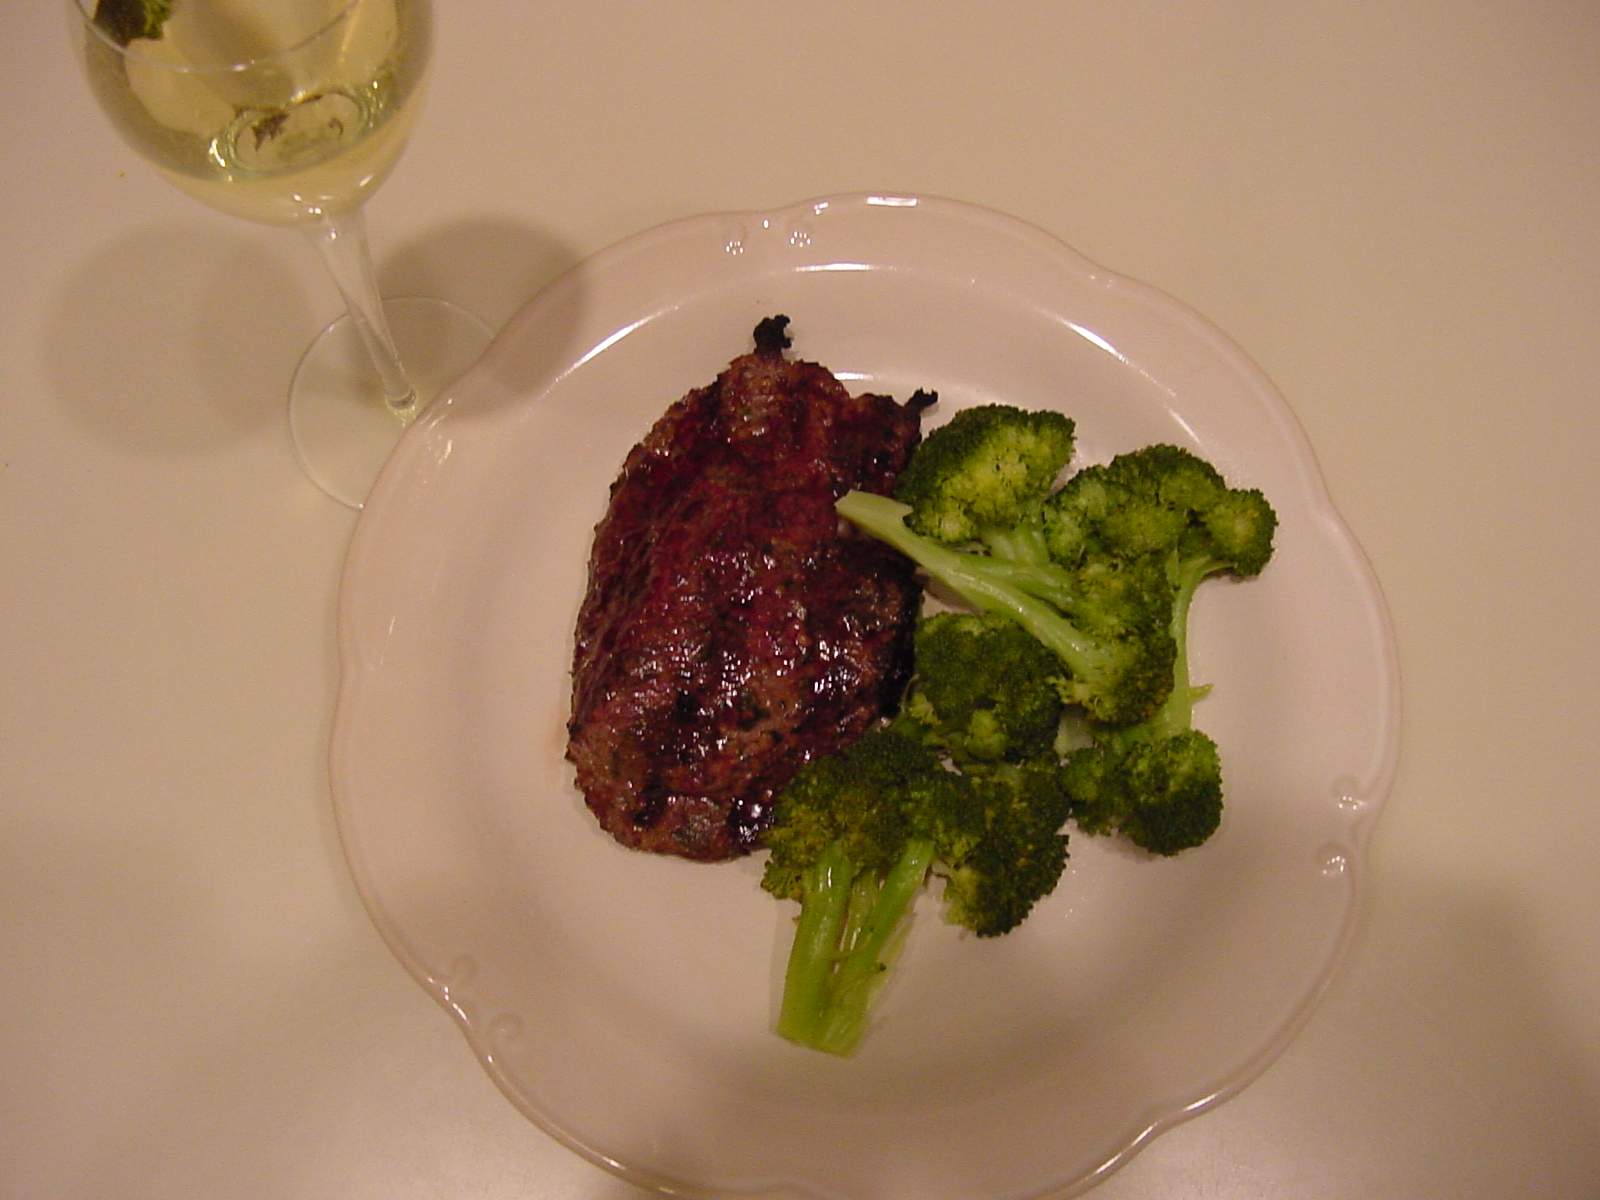 Beef Rib Steaks grilled in Pesto Marinade and Steamed Broccoli